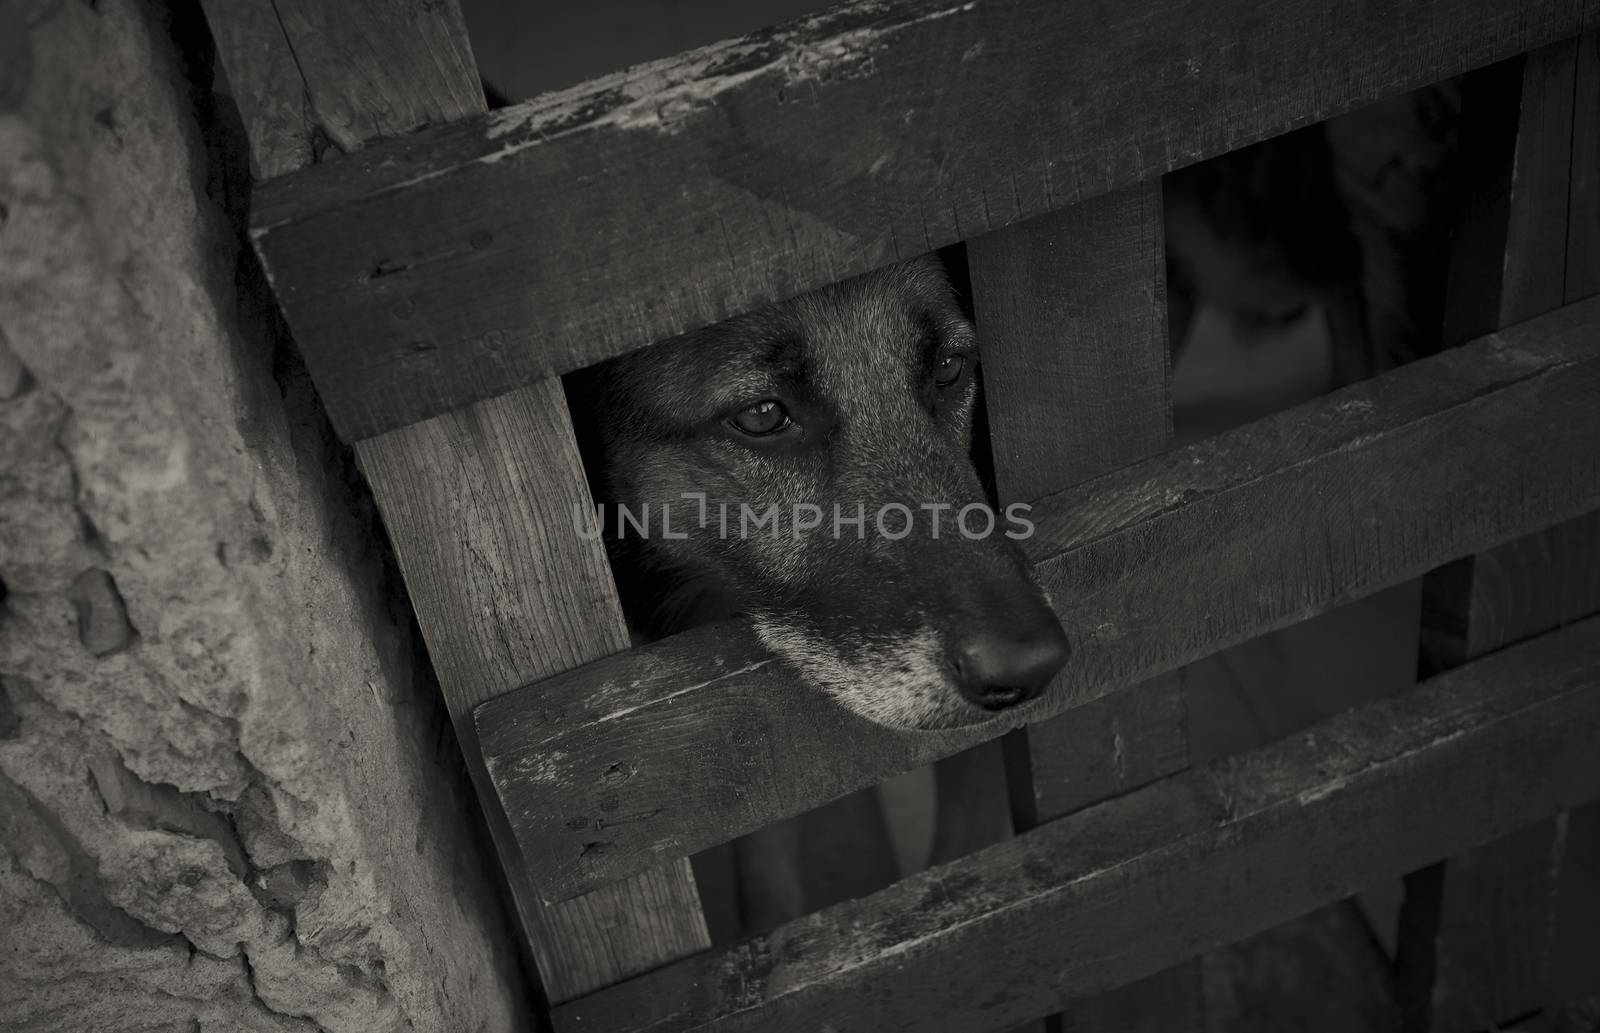 Dog gazing out of his cage with the hope in his eyes that one day he could breathe the air of freedom again.